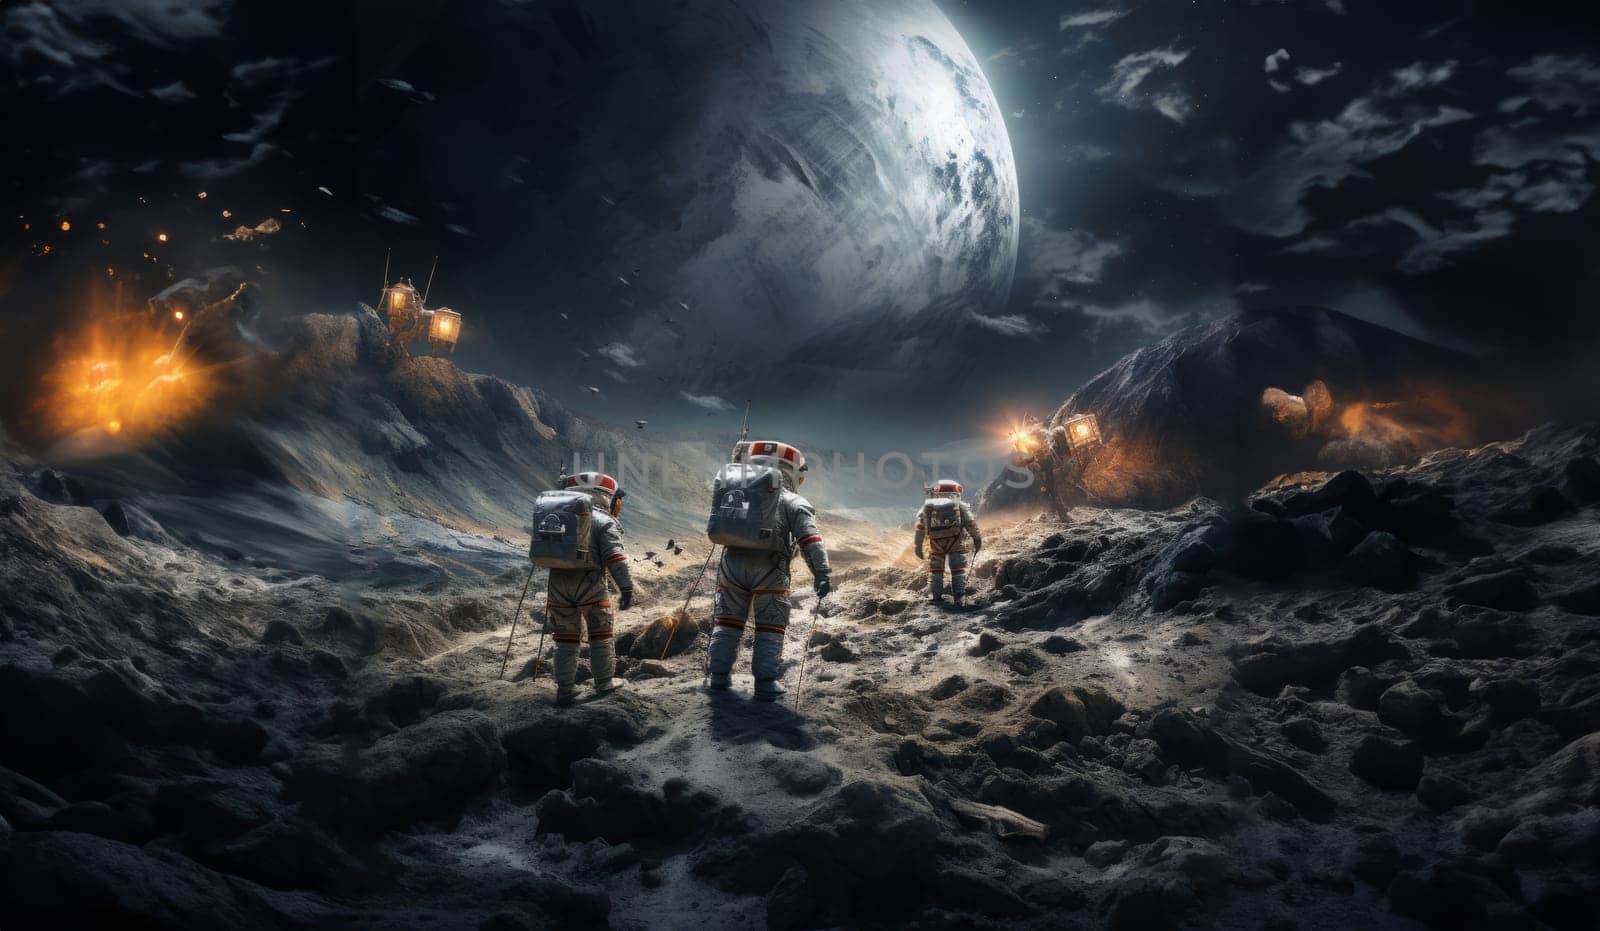 A group of modern astronauts is depicted exploring the hazardous surface of the moon in outer space, showcasing the daring mission of discovery and adventure in lunar exploration.Generated image.